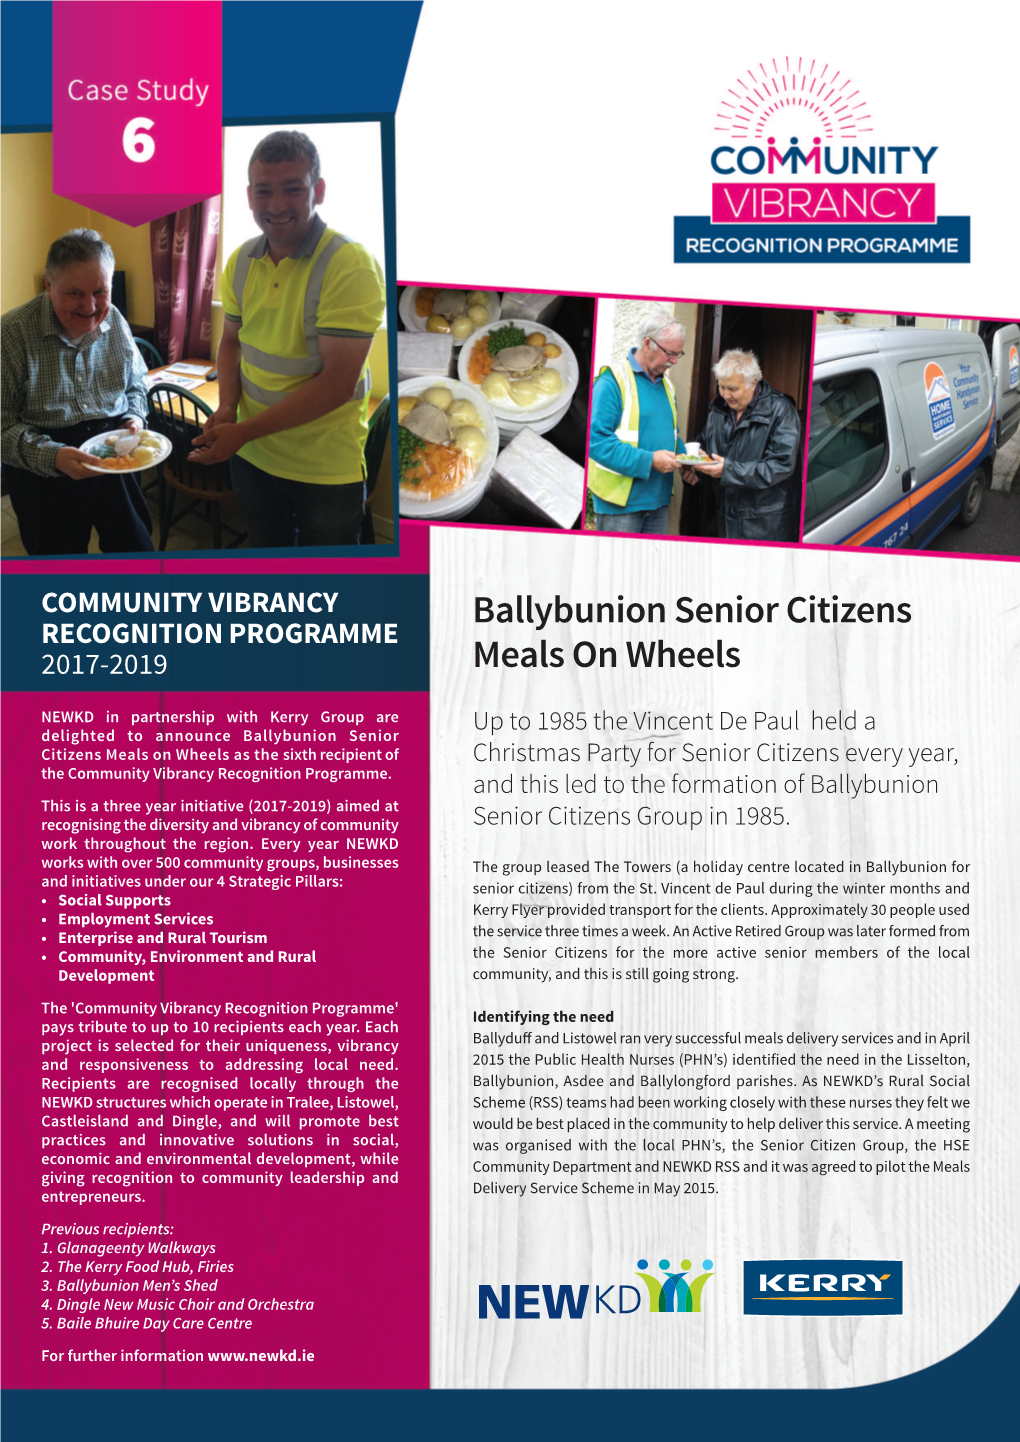 Ballybunion Senior Citizens Meals on Wheels As the Sixth Recipient of Christmas Party for Senior Citizens Every Year, the Community Vibrancy Recognition Programme